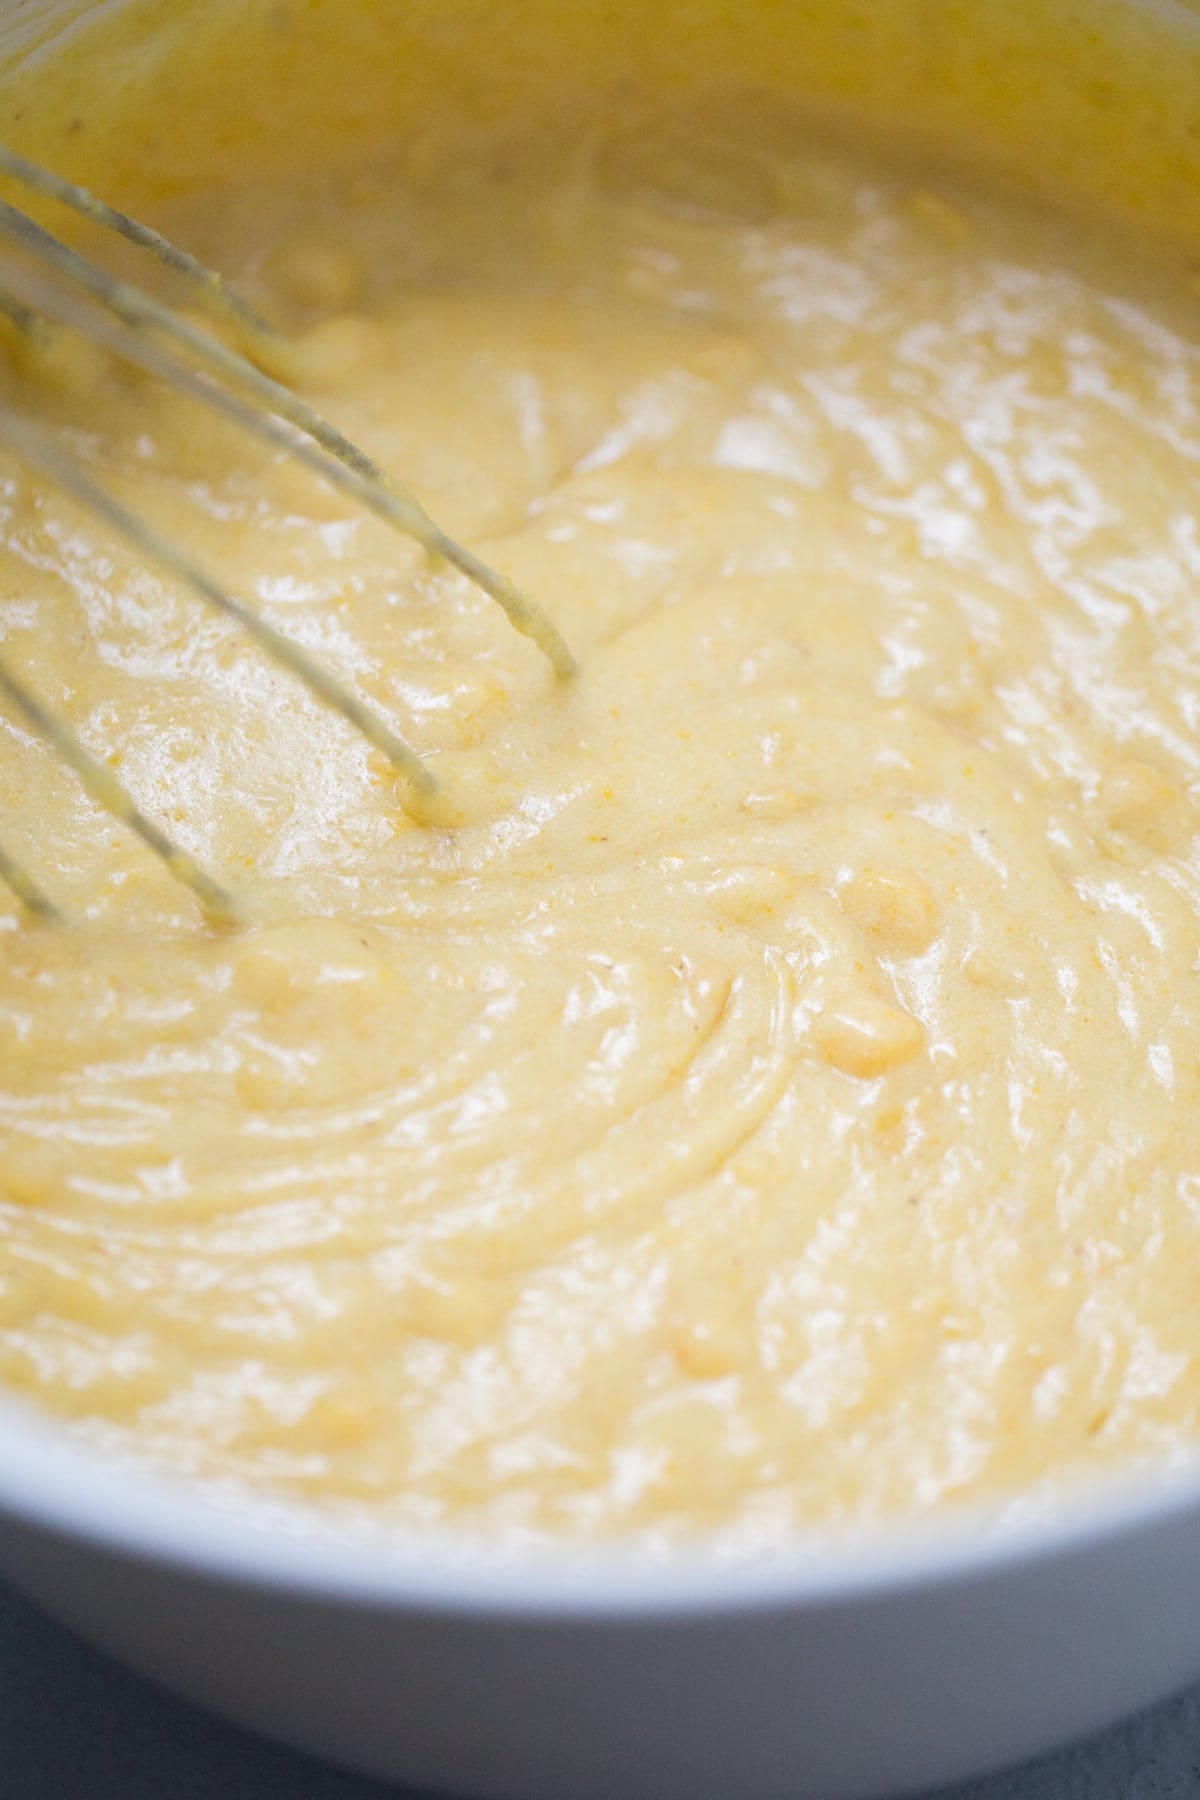 Cornbread batter in a white bowl being mixed with a whisk